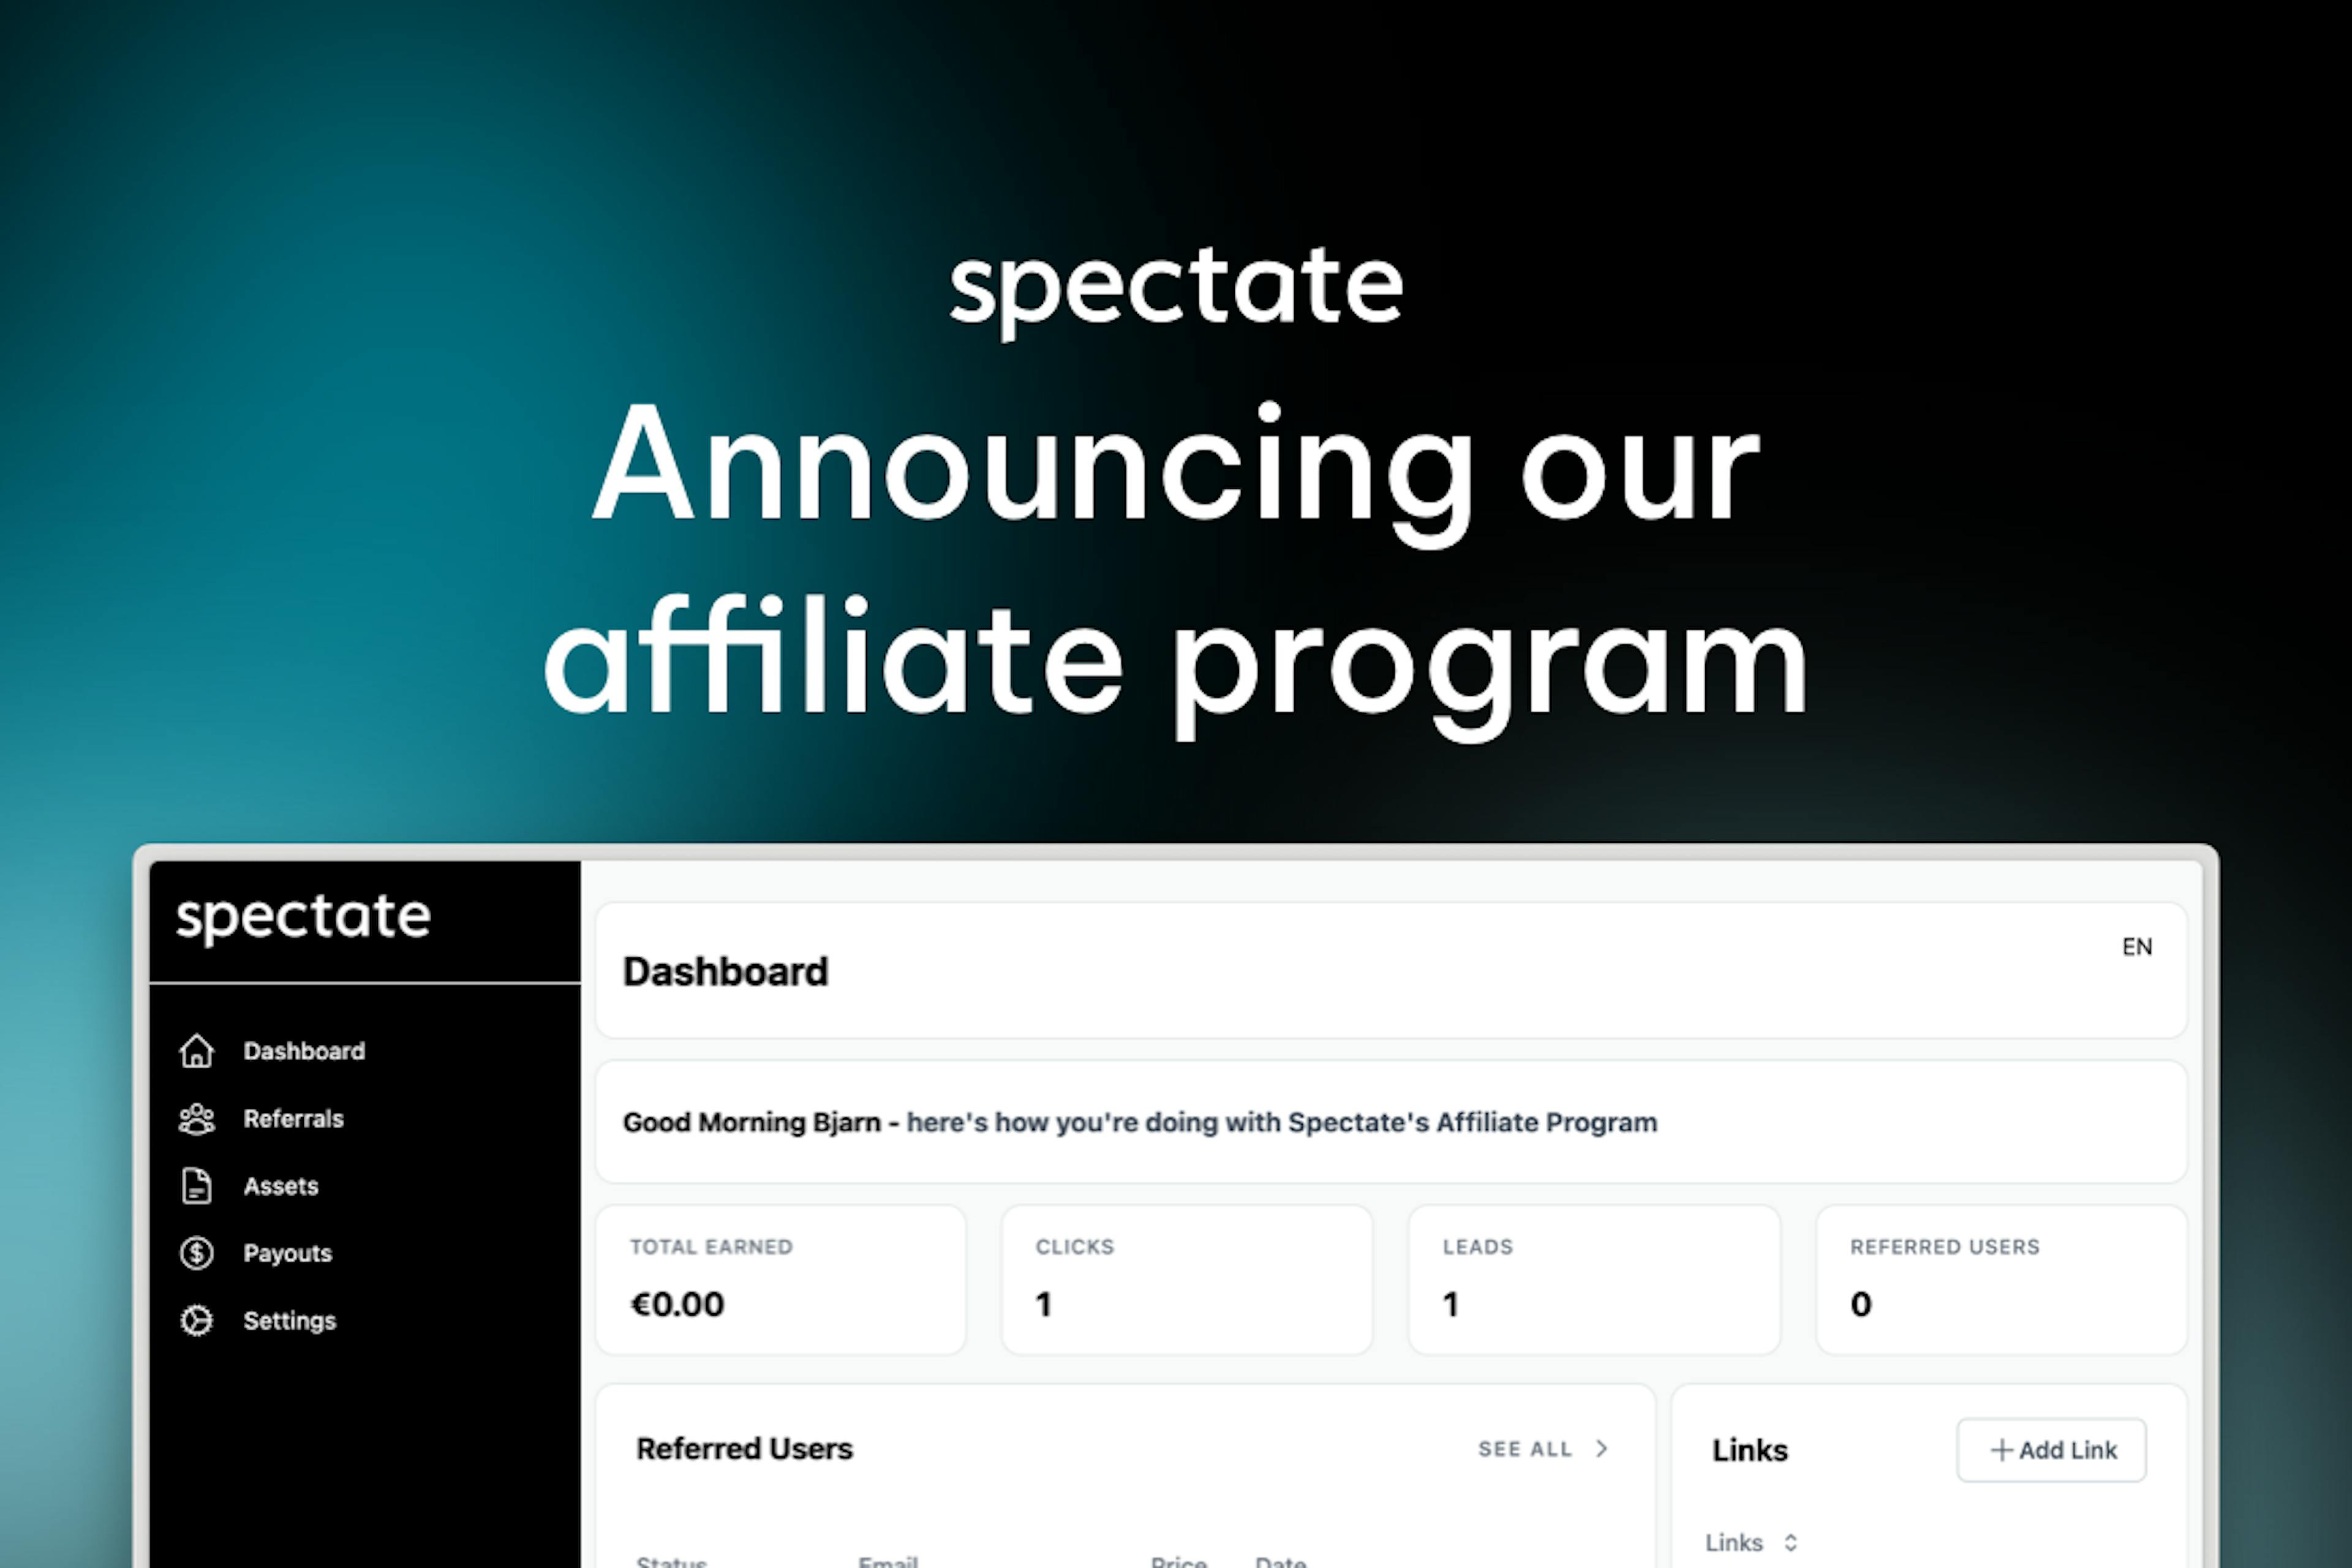 Image showing the affiliate program and captioned by "Announcing our affiliate program".